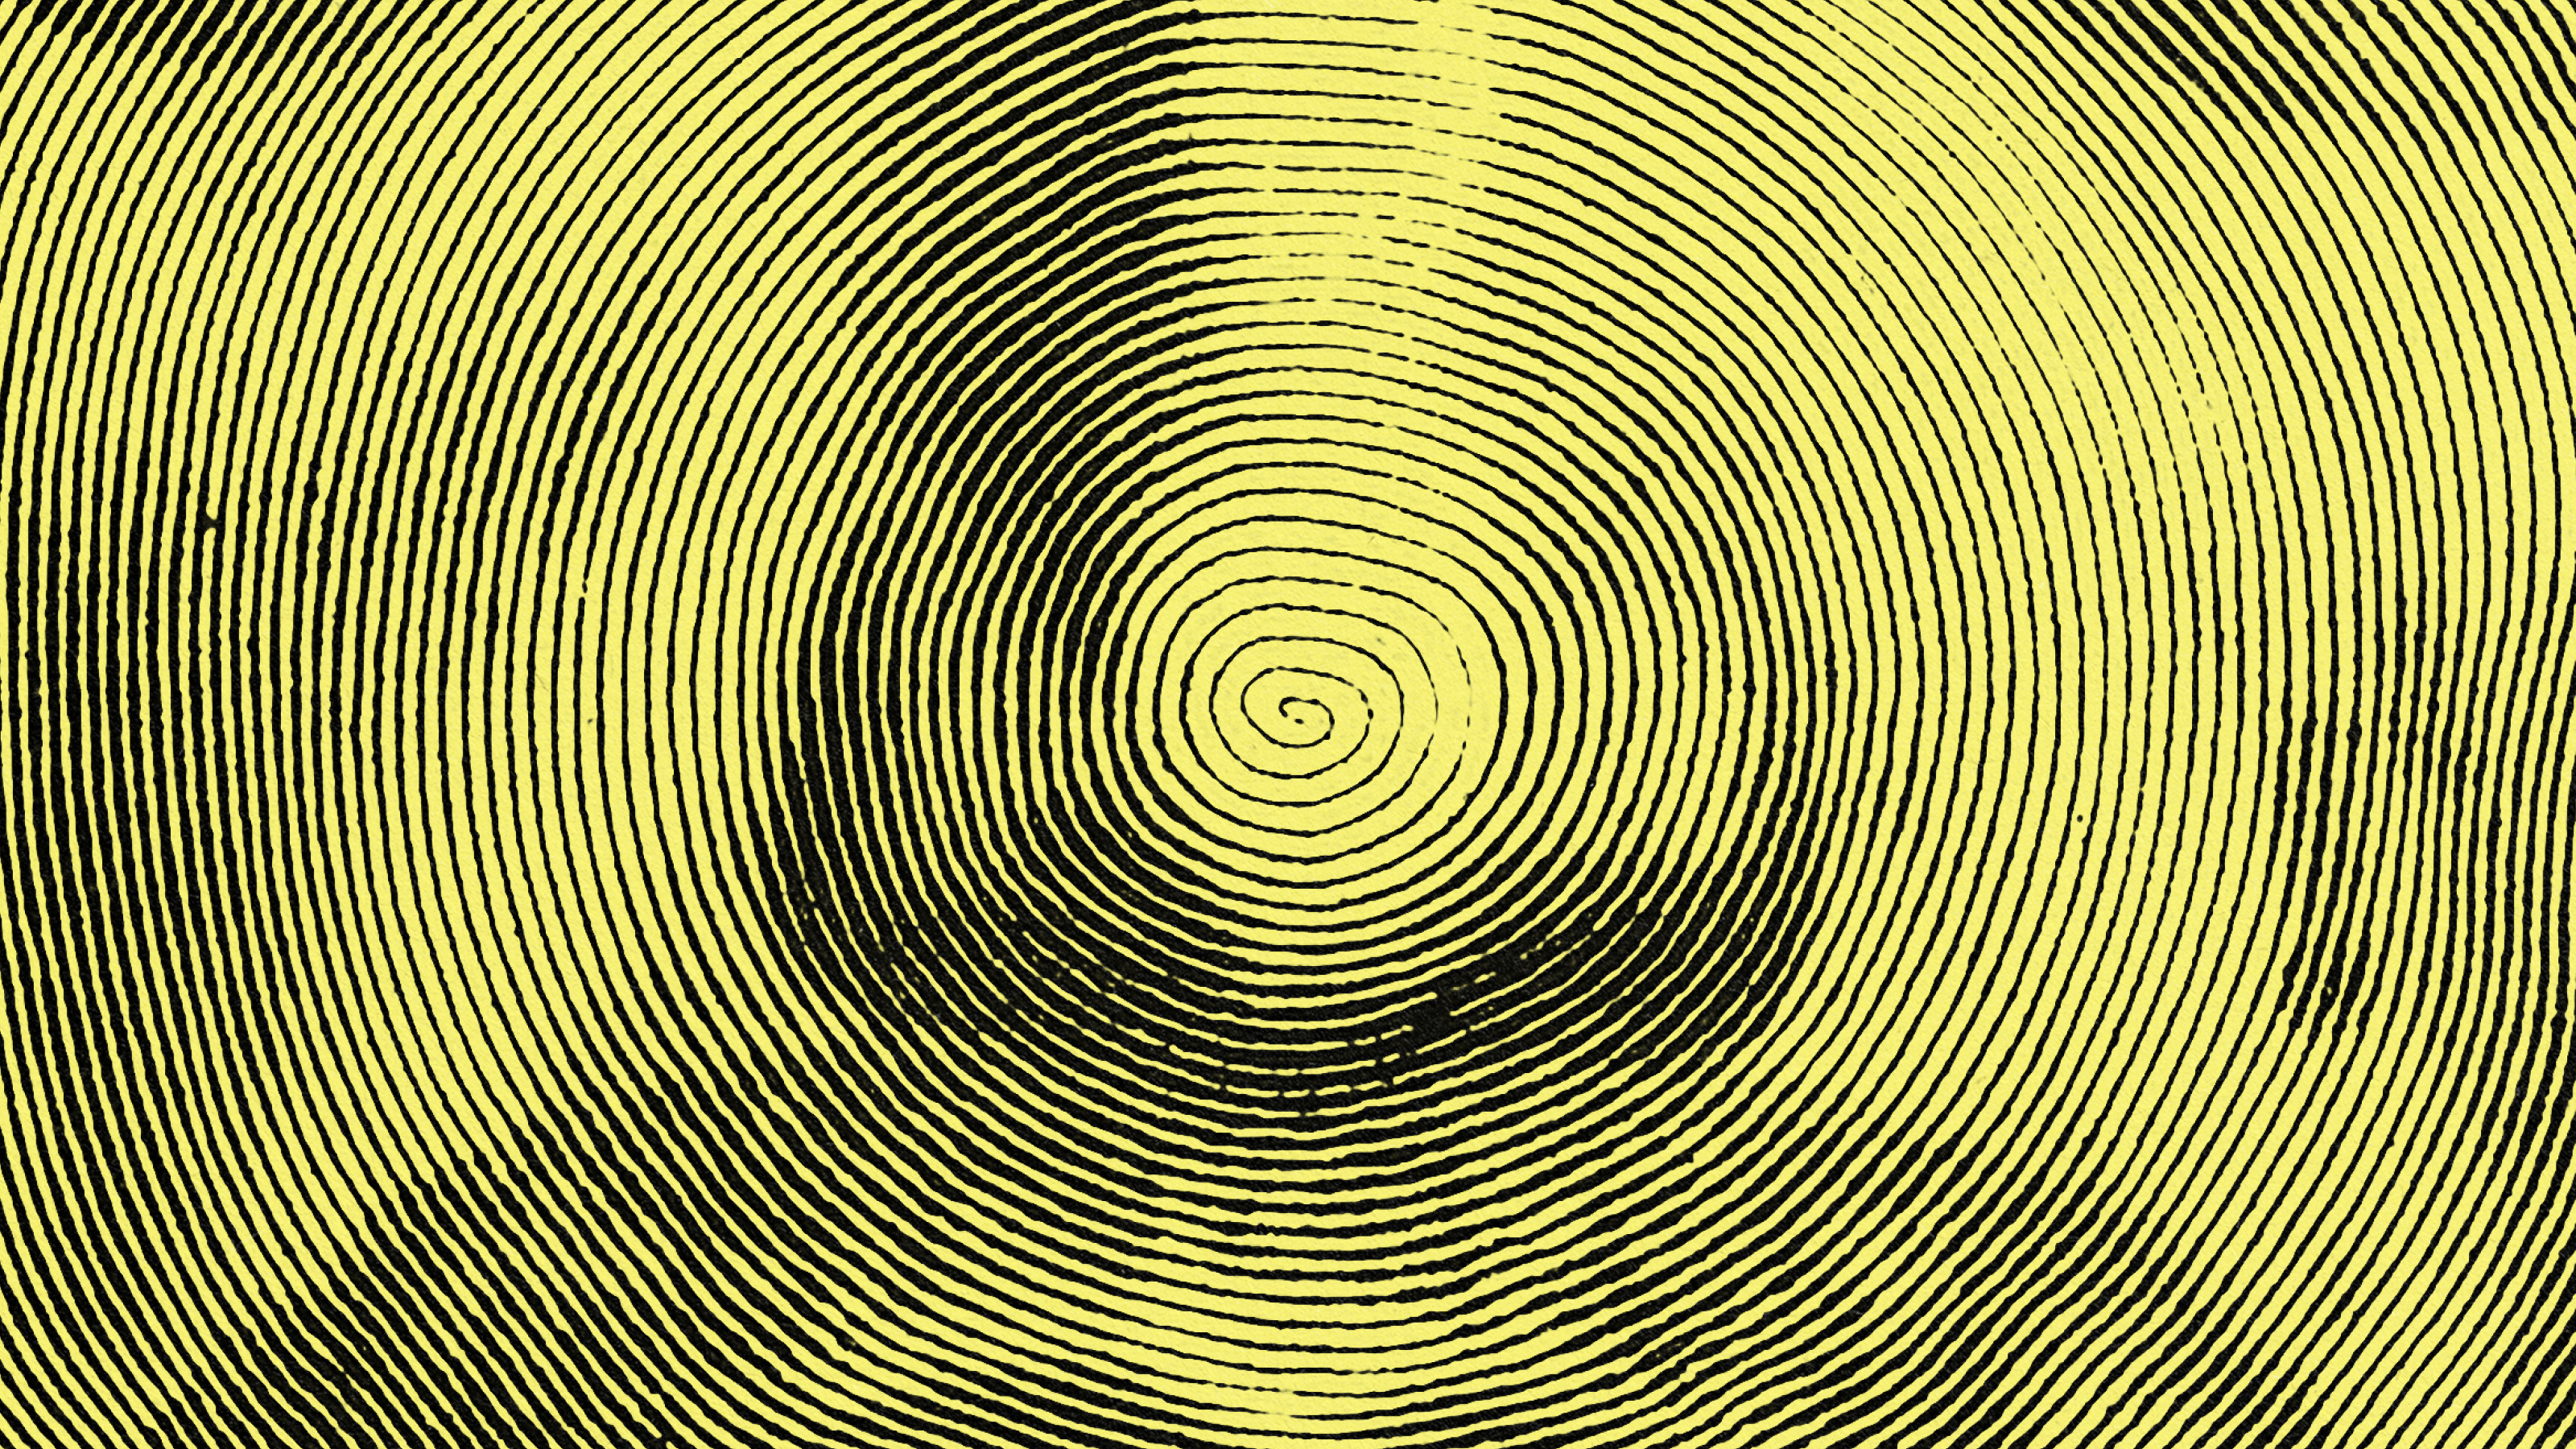 a yellow drawing of a man's face with a wave pattern.